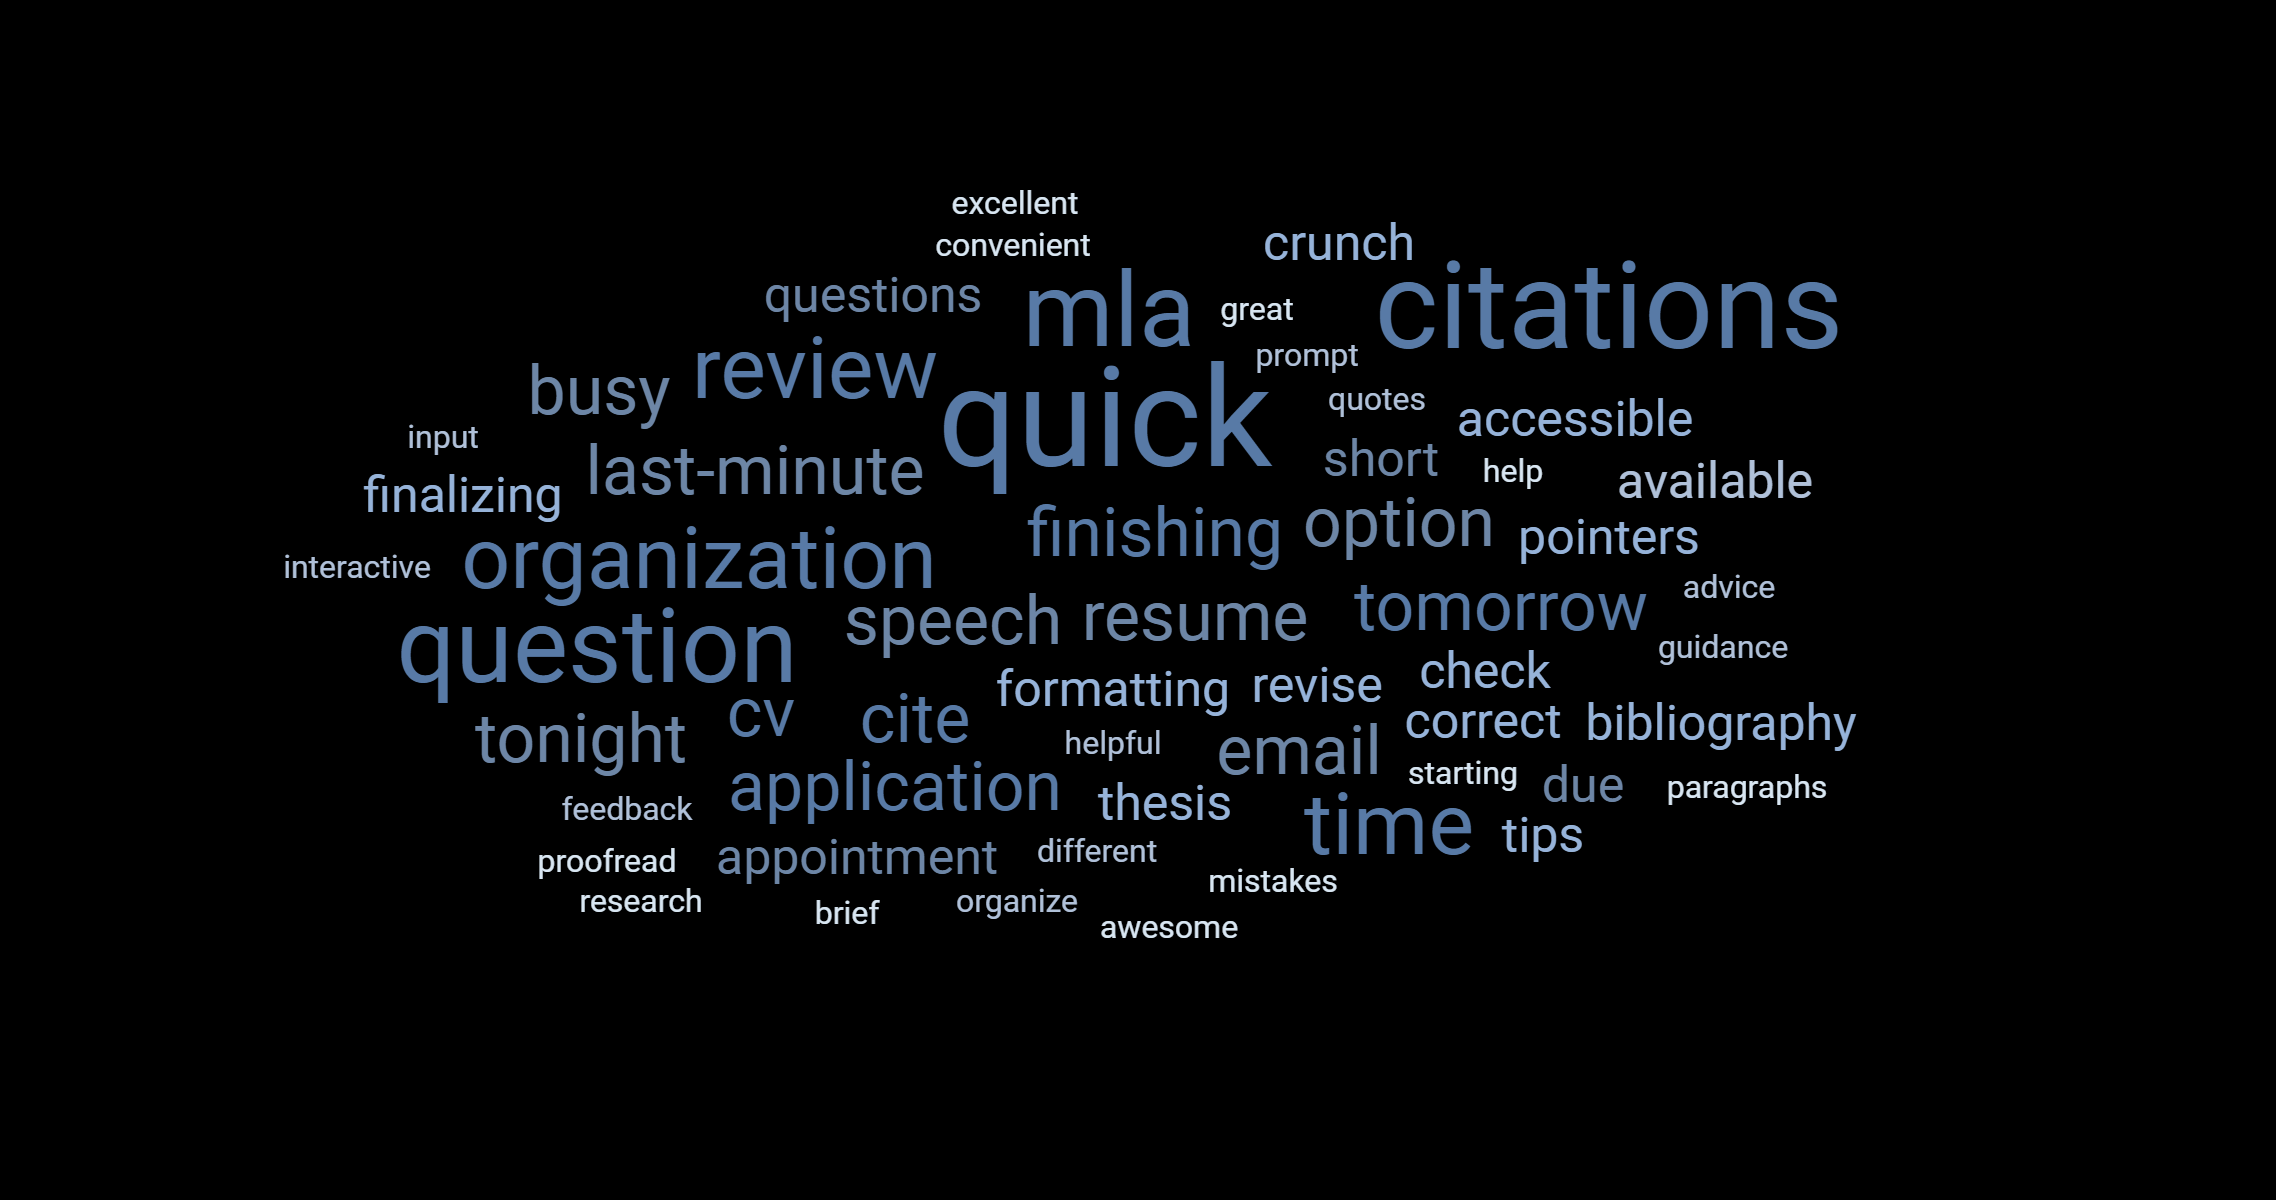 A word cloud composed using data from open-ended fields in Flash Tutoring writers' survey responses. The most prominent words in the cloud are: quick, citations, question, organization, MLA, review, last-minute, tonight, application, cite, resume, finishing, option, and tomorrow.